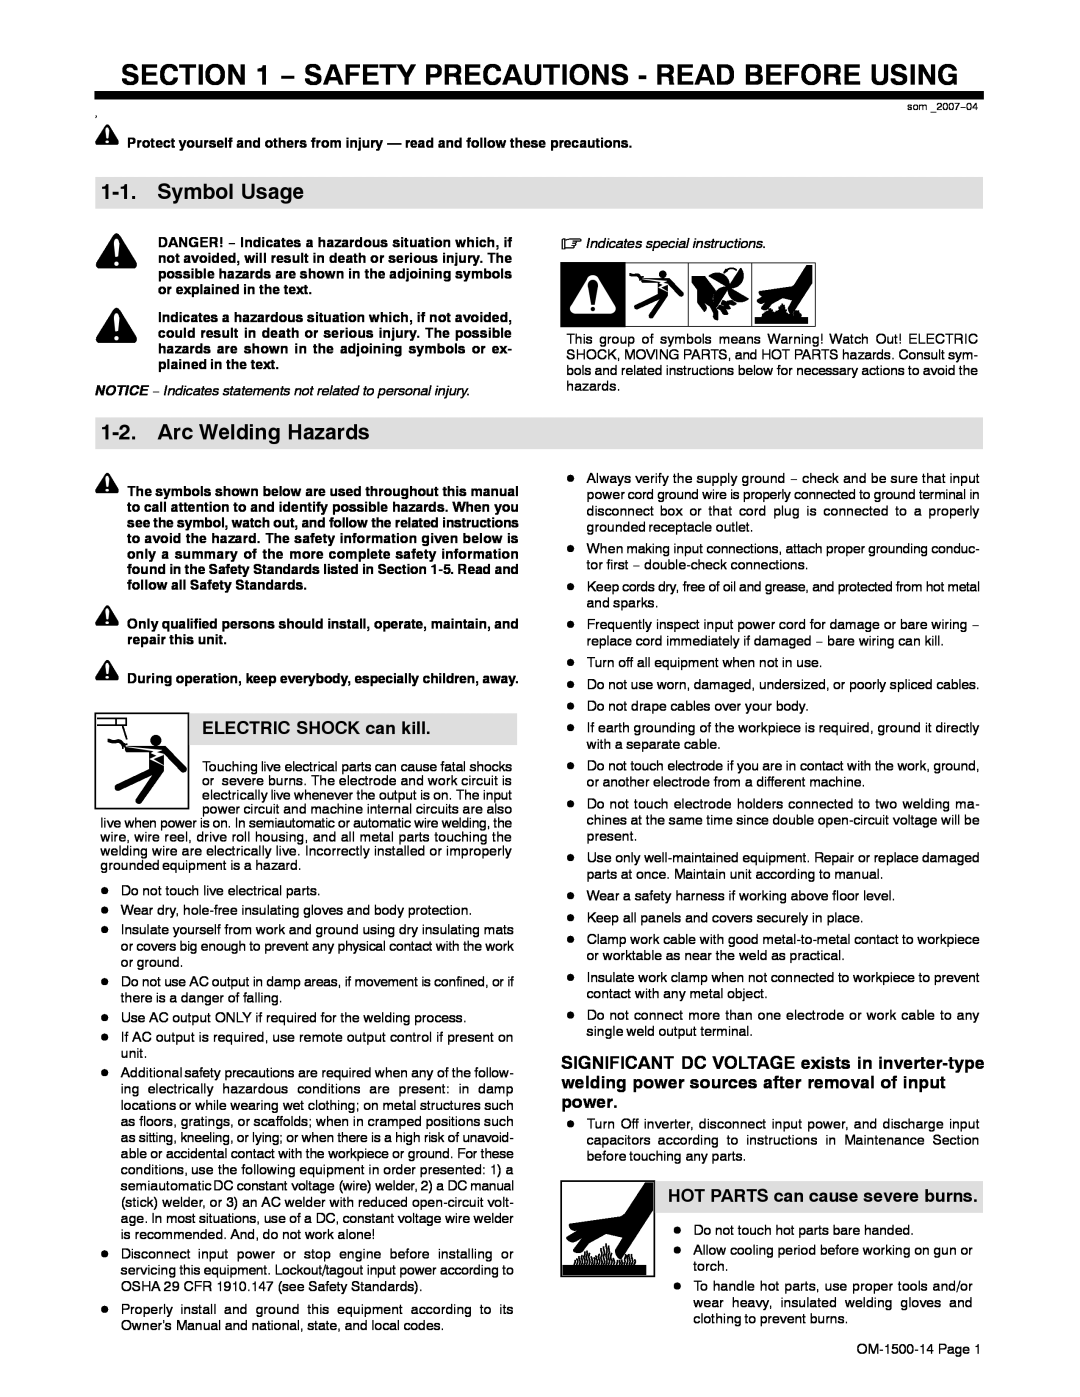 Miller Electric and DS-74DX16, DS-74DX12 manual Safety Precautions - Read Before Using, Symbol Usage, Arc Welding Hazards 